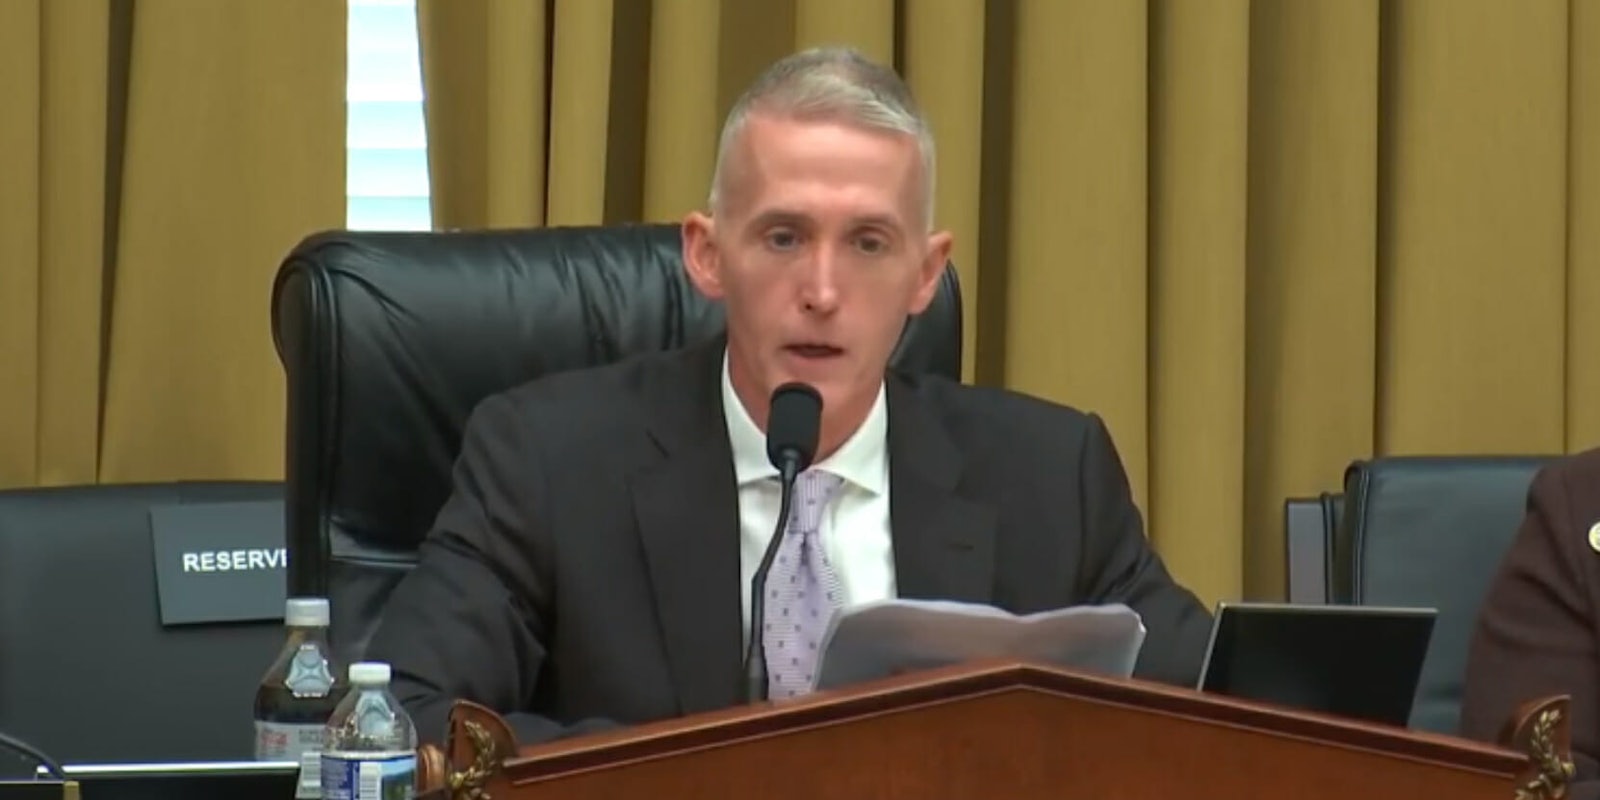 Trey Gowdy said on Wednesday that he would not seek reelection in 2018.